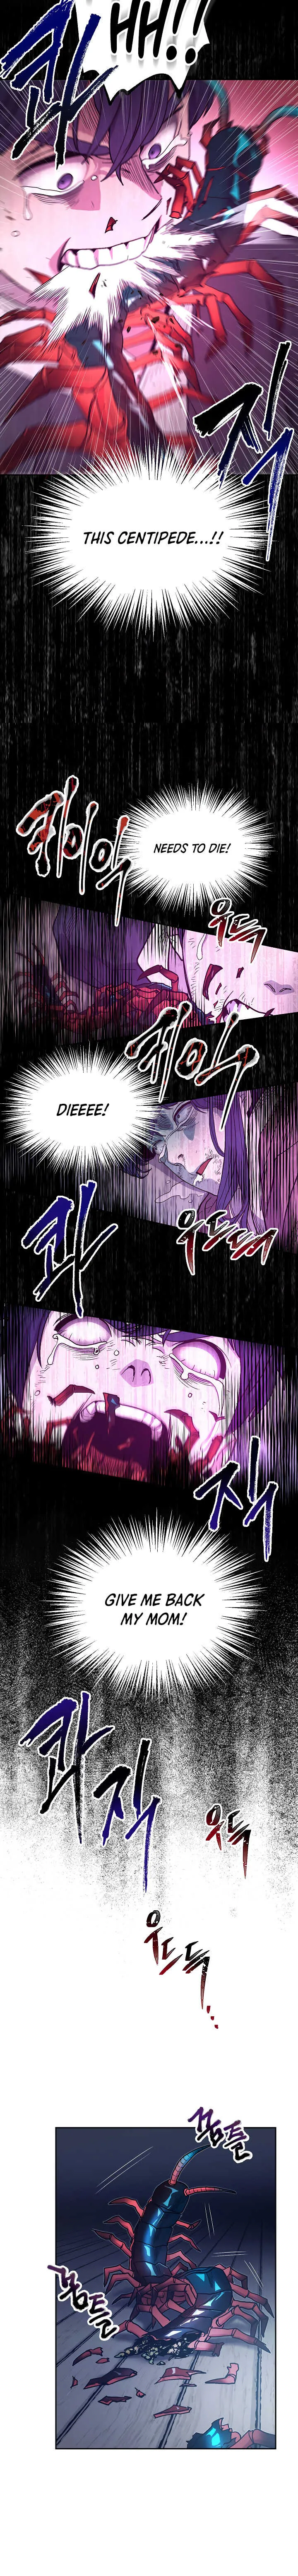 Poison Dragon: The Legend of an Asura Chapter 1 page 9